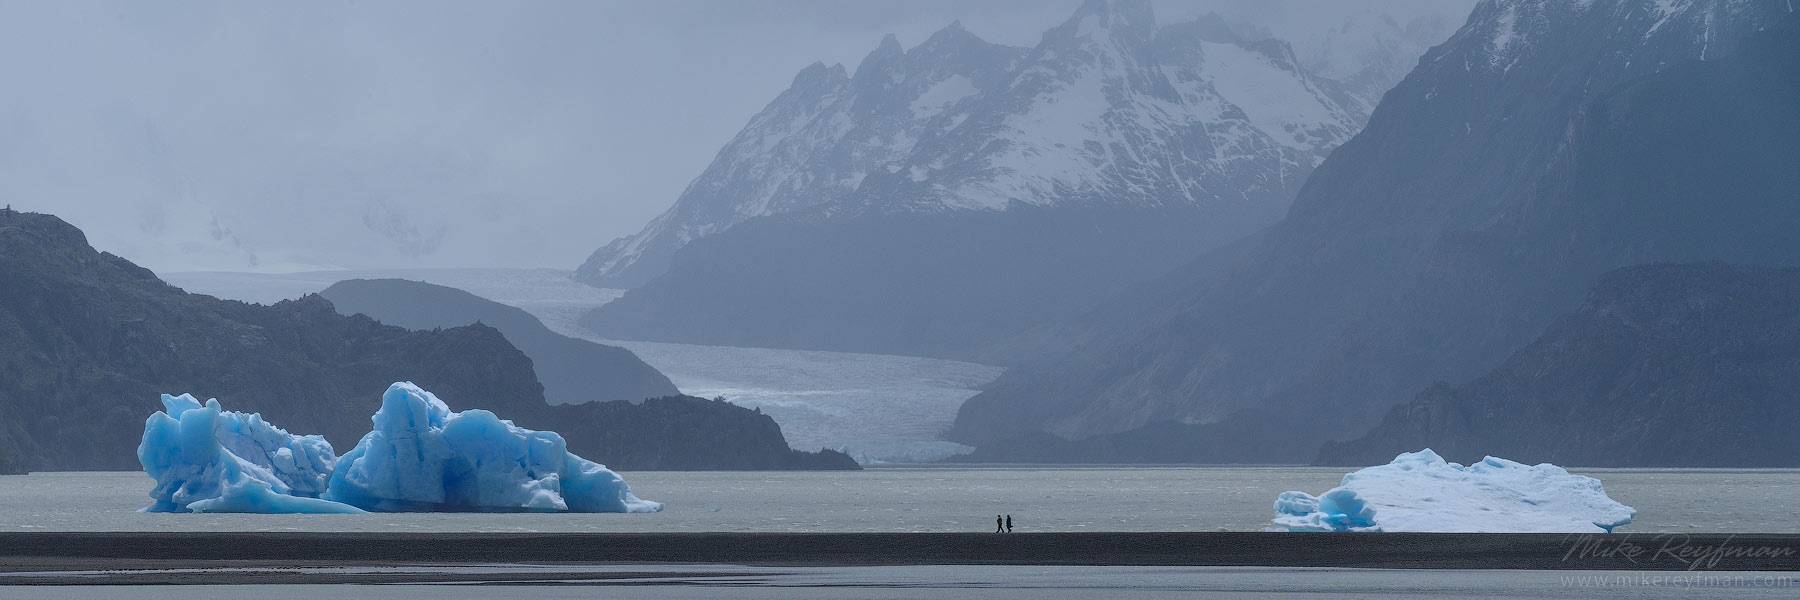 Tourists exploring icebergs in Lago Grey with Grey Glacier on the background. Torres del Paine National Park, Ultima Esperanza Province, Magallanes and Antartica Chilena Region XII, Patagonia, Chile.